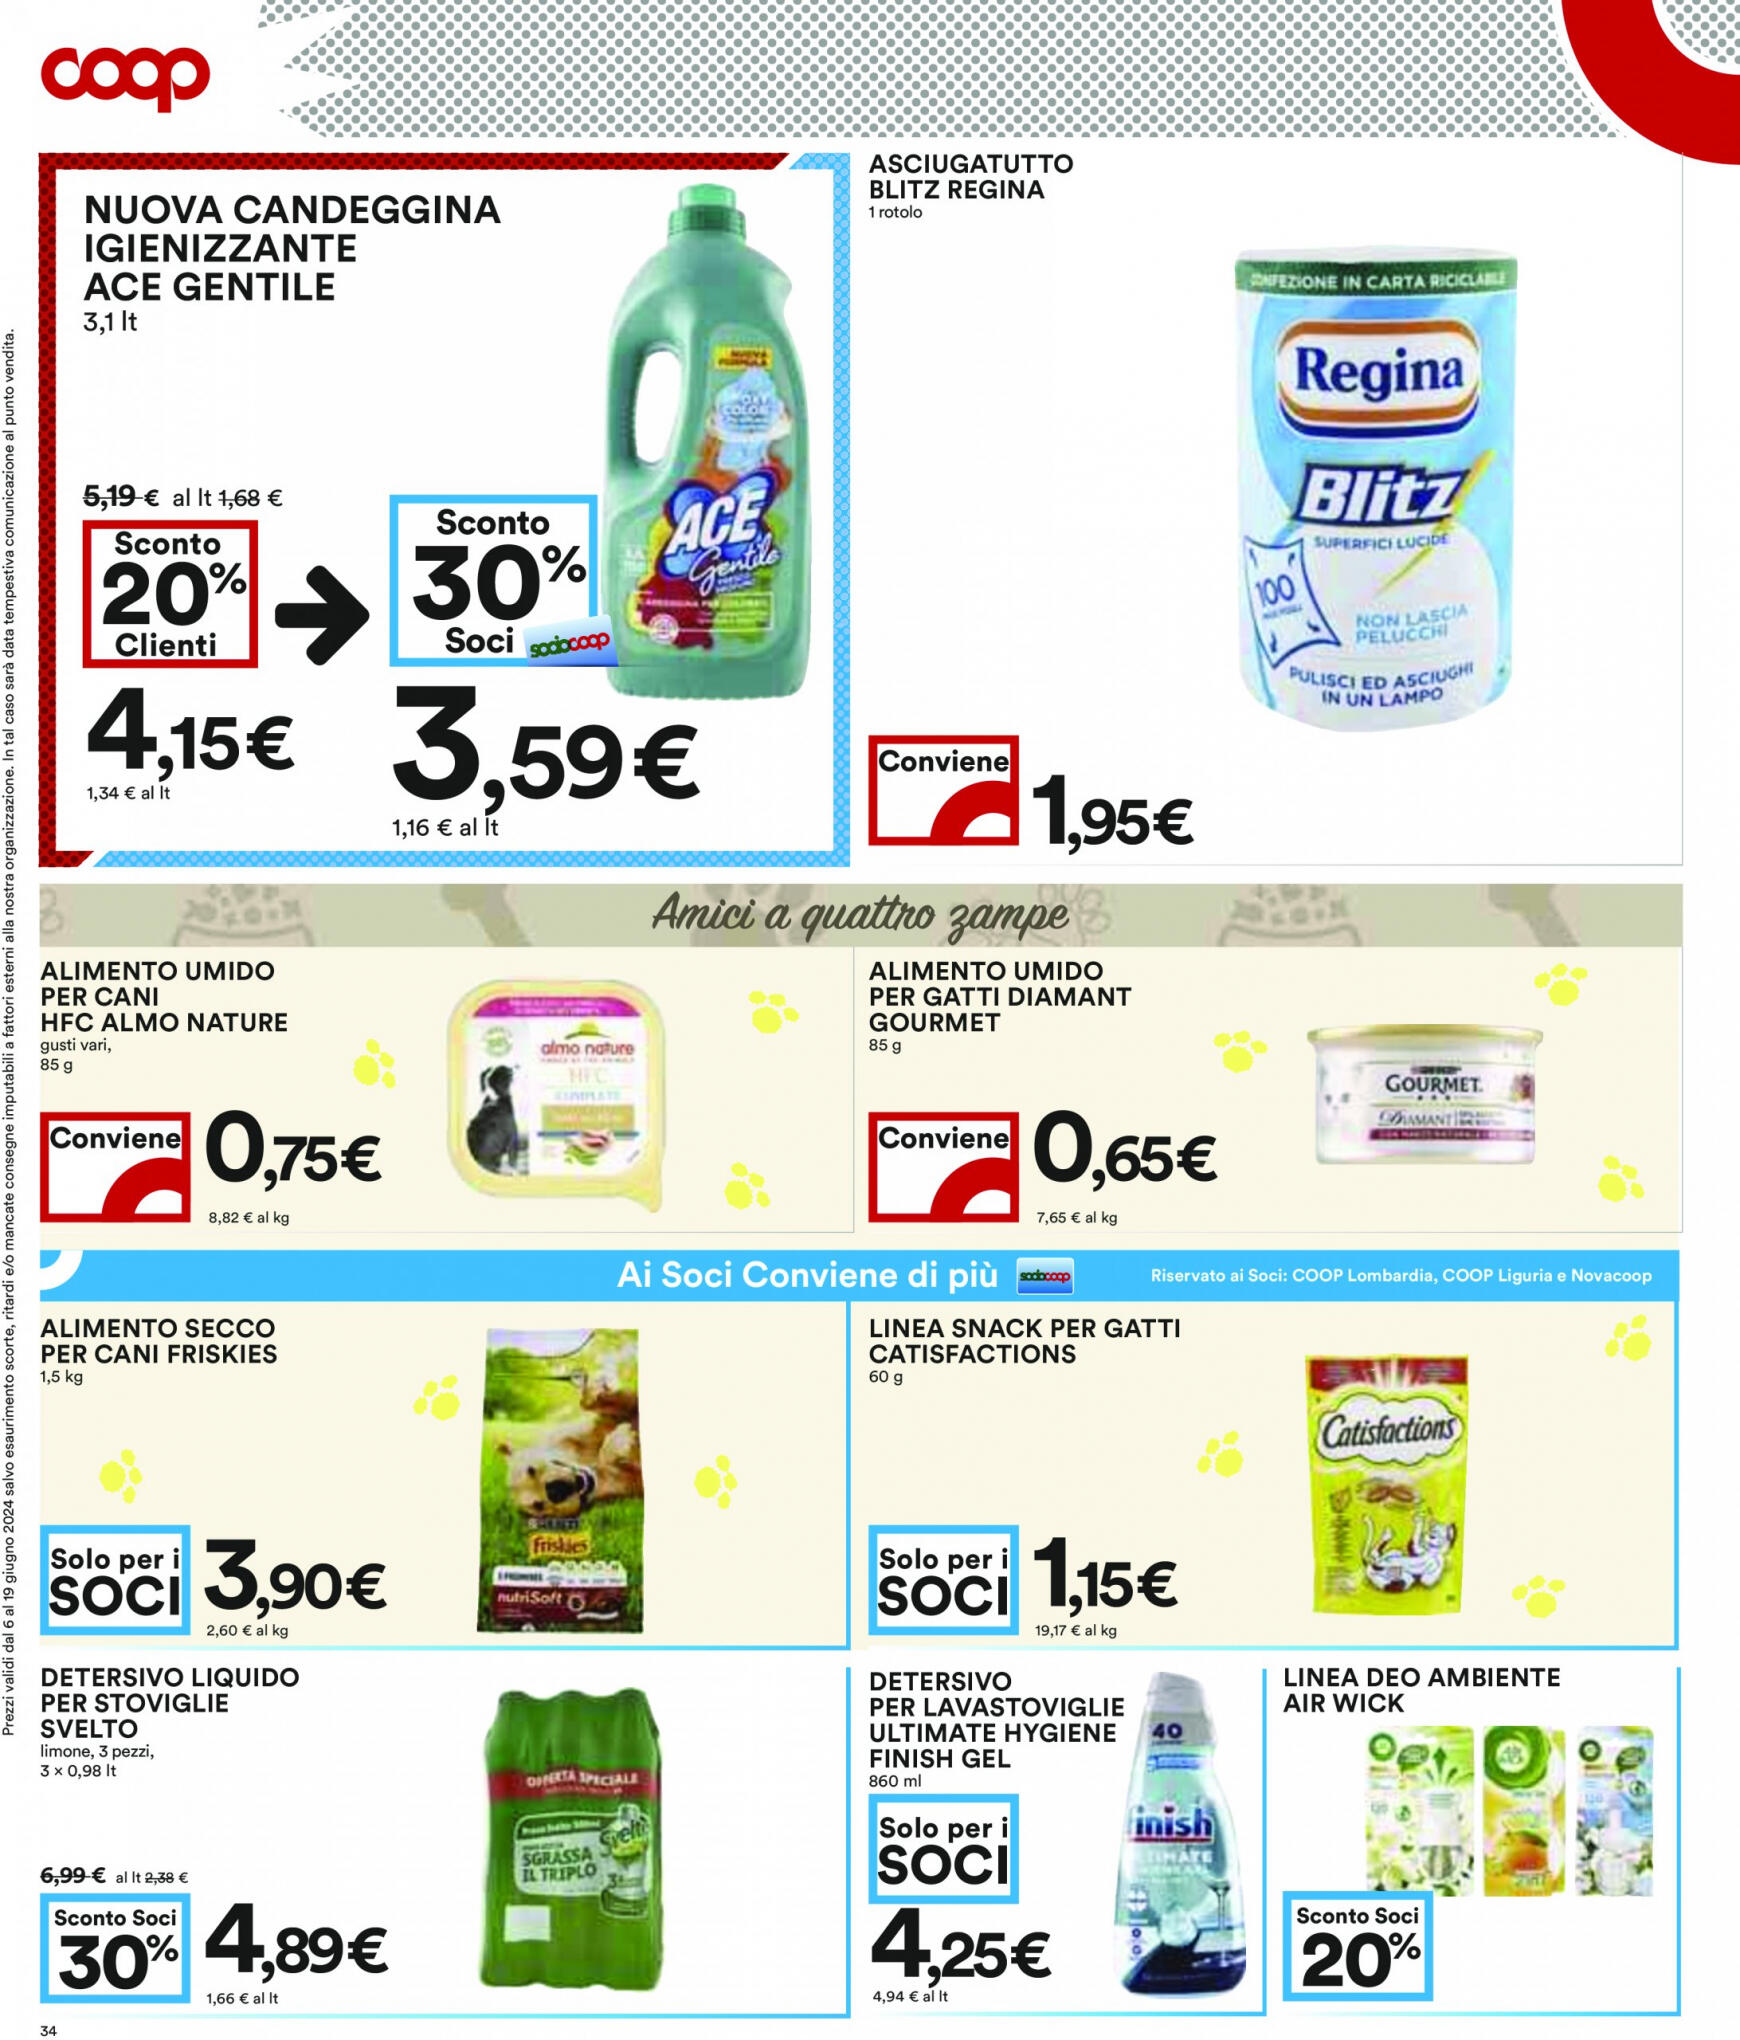 coop - Nuovo volantino Coop 10.06. - 19.06. - page: 34